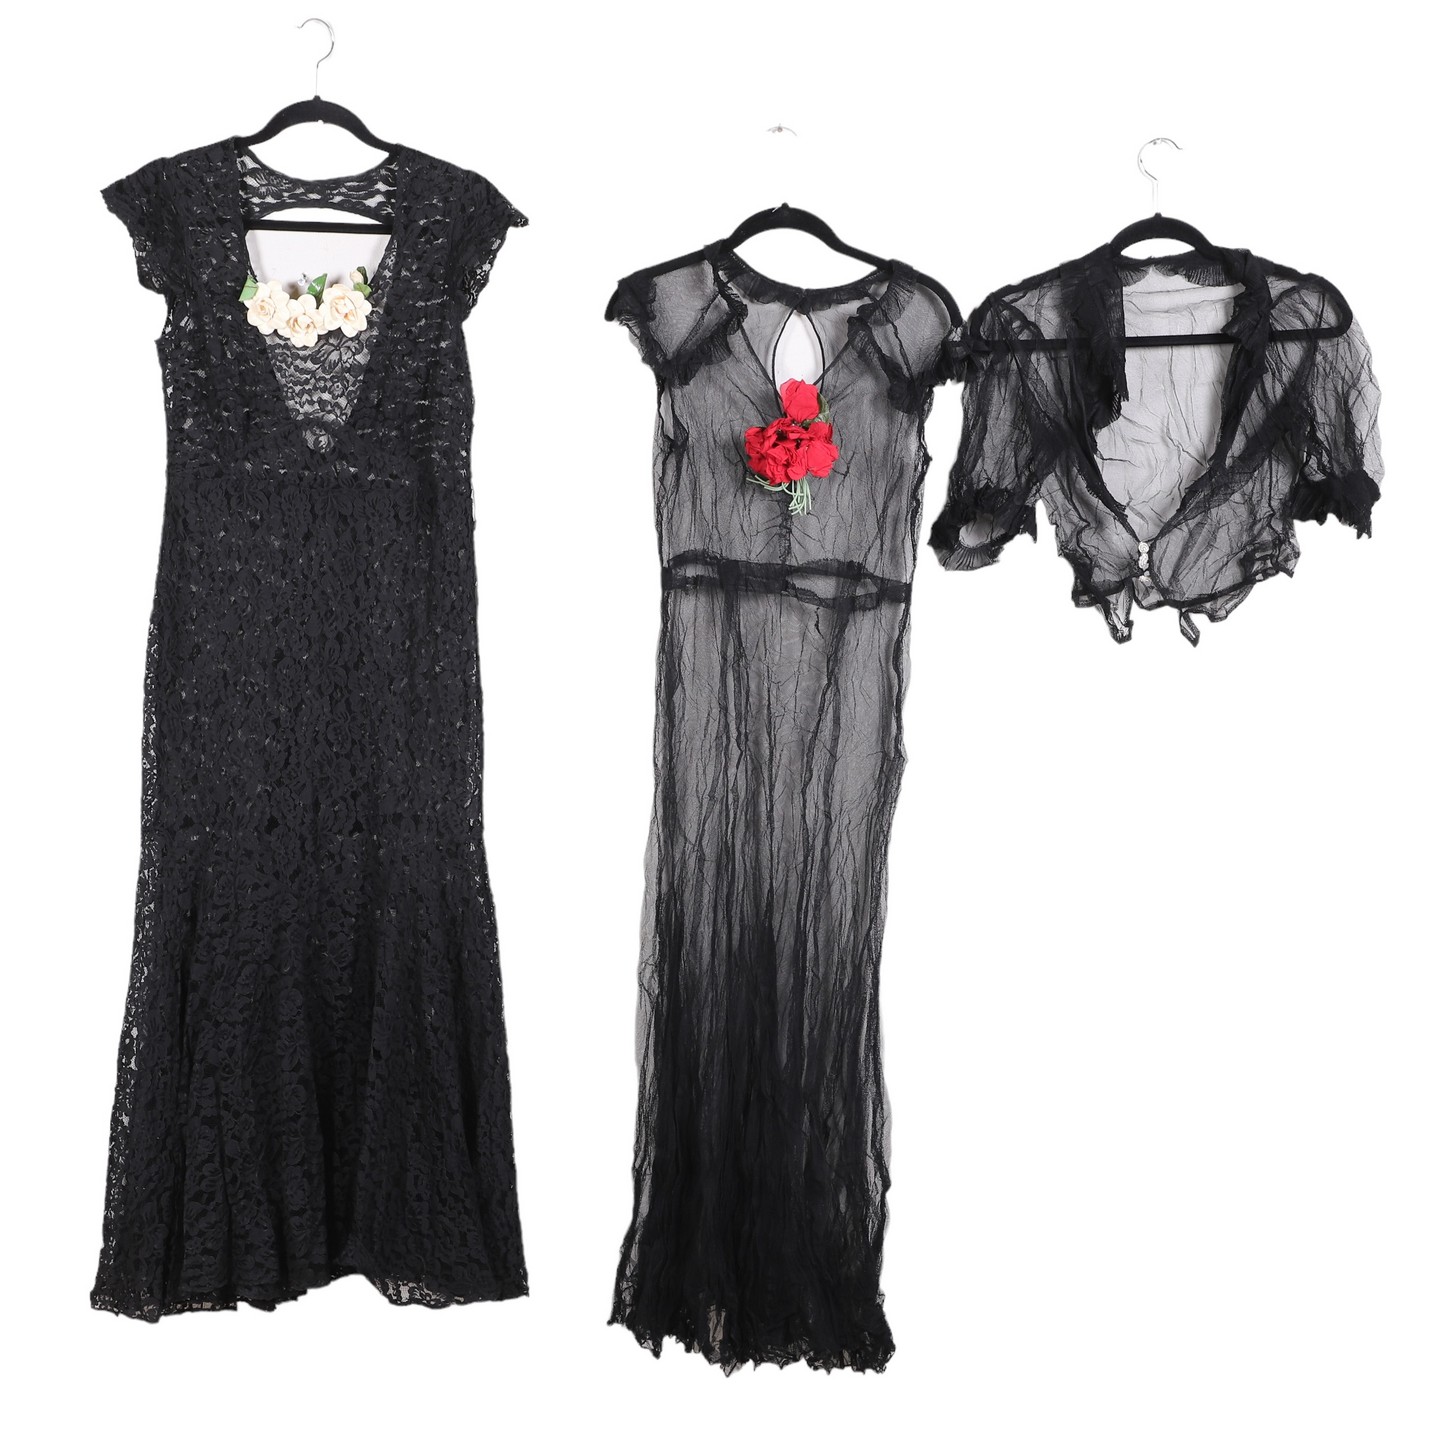  2 Early 20th c black lace dresses  27a700